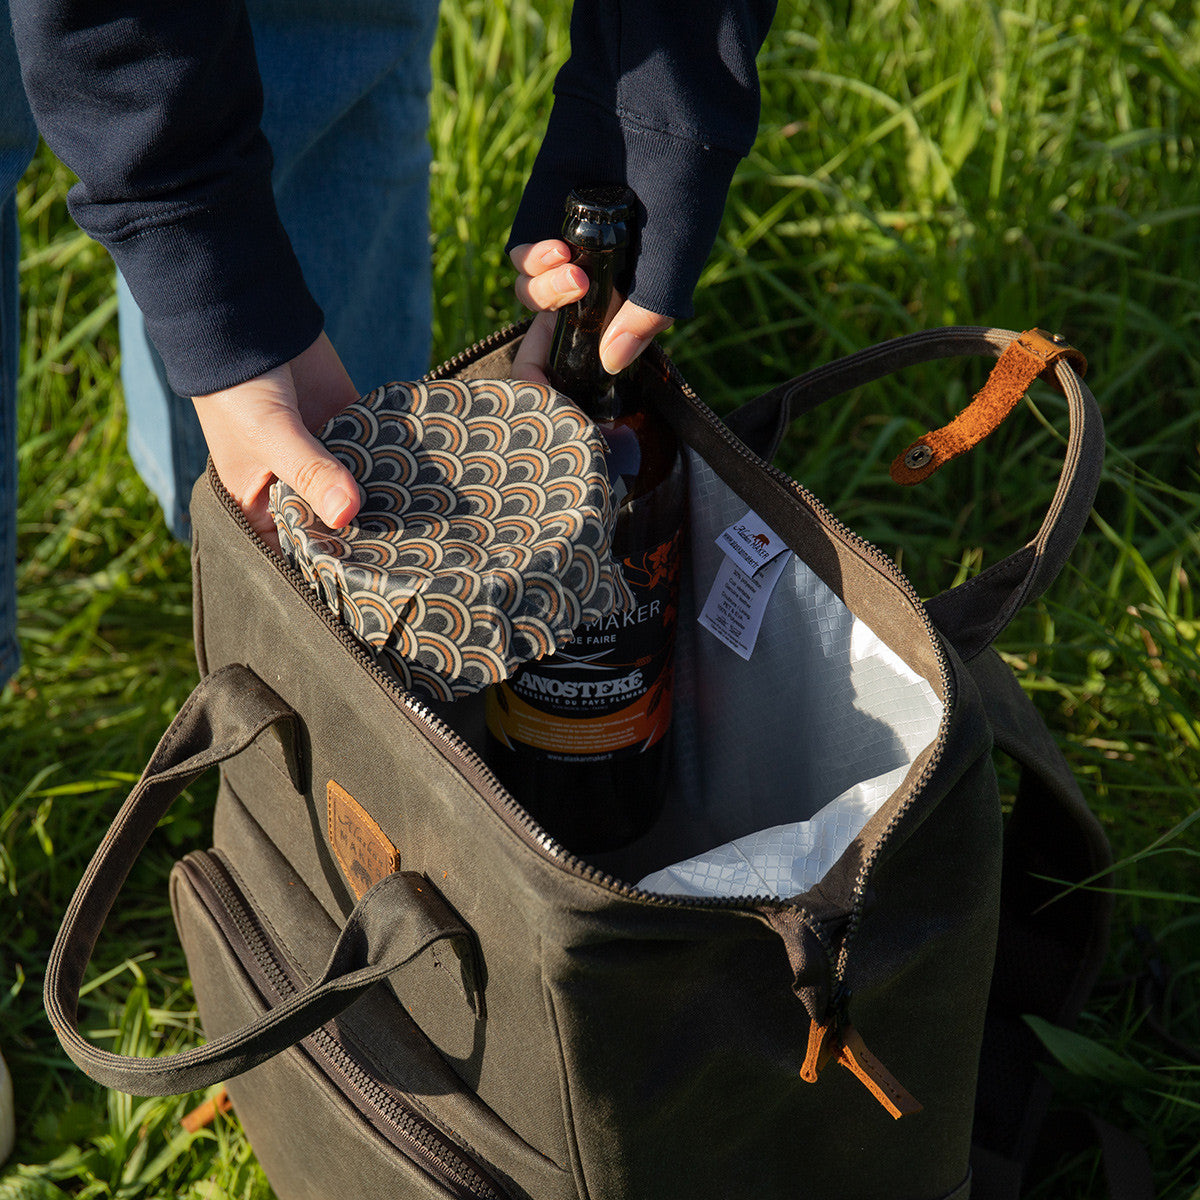 Waxed canvas picnic backpack with the zipped top open to shown the insides